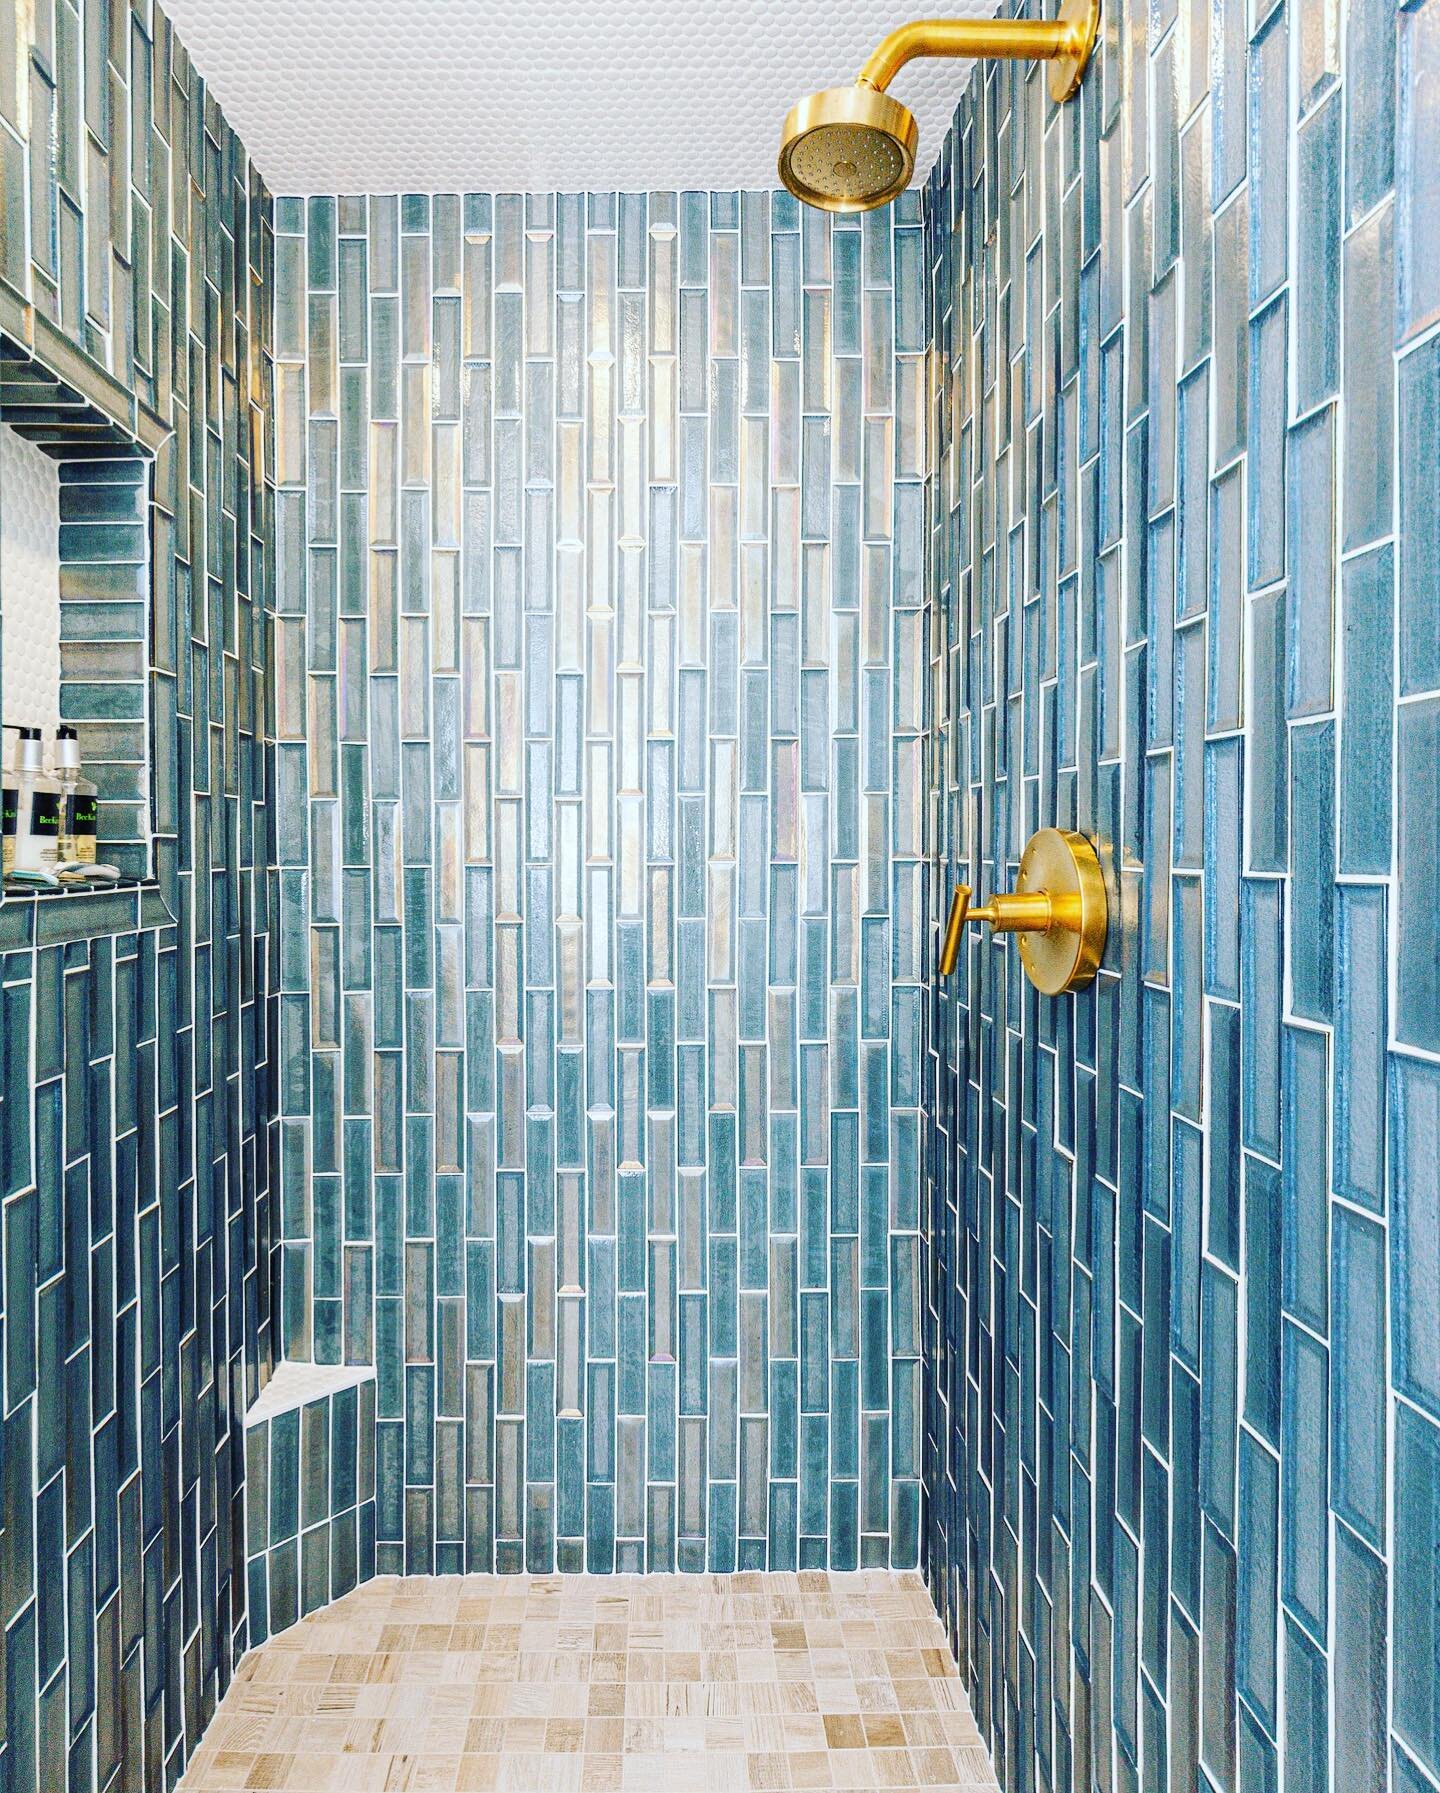 Texture. Glass. Blue. Brass.  Opulent and dreamy.  Comes complete with a ledge to shave your legs ... AND no schluter ... winwinwin &bull;
&bull;
&bull;
&bull;
&bull;
Design by @editandscaledesign 

#interiordesigner #newconstruction #utahstyle #desi